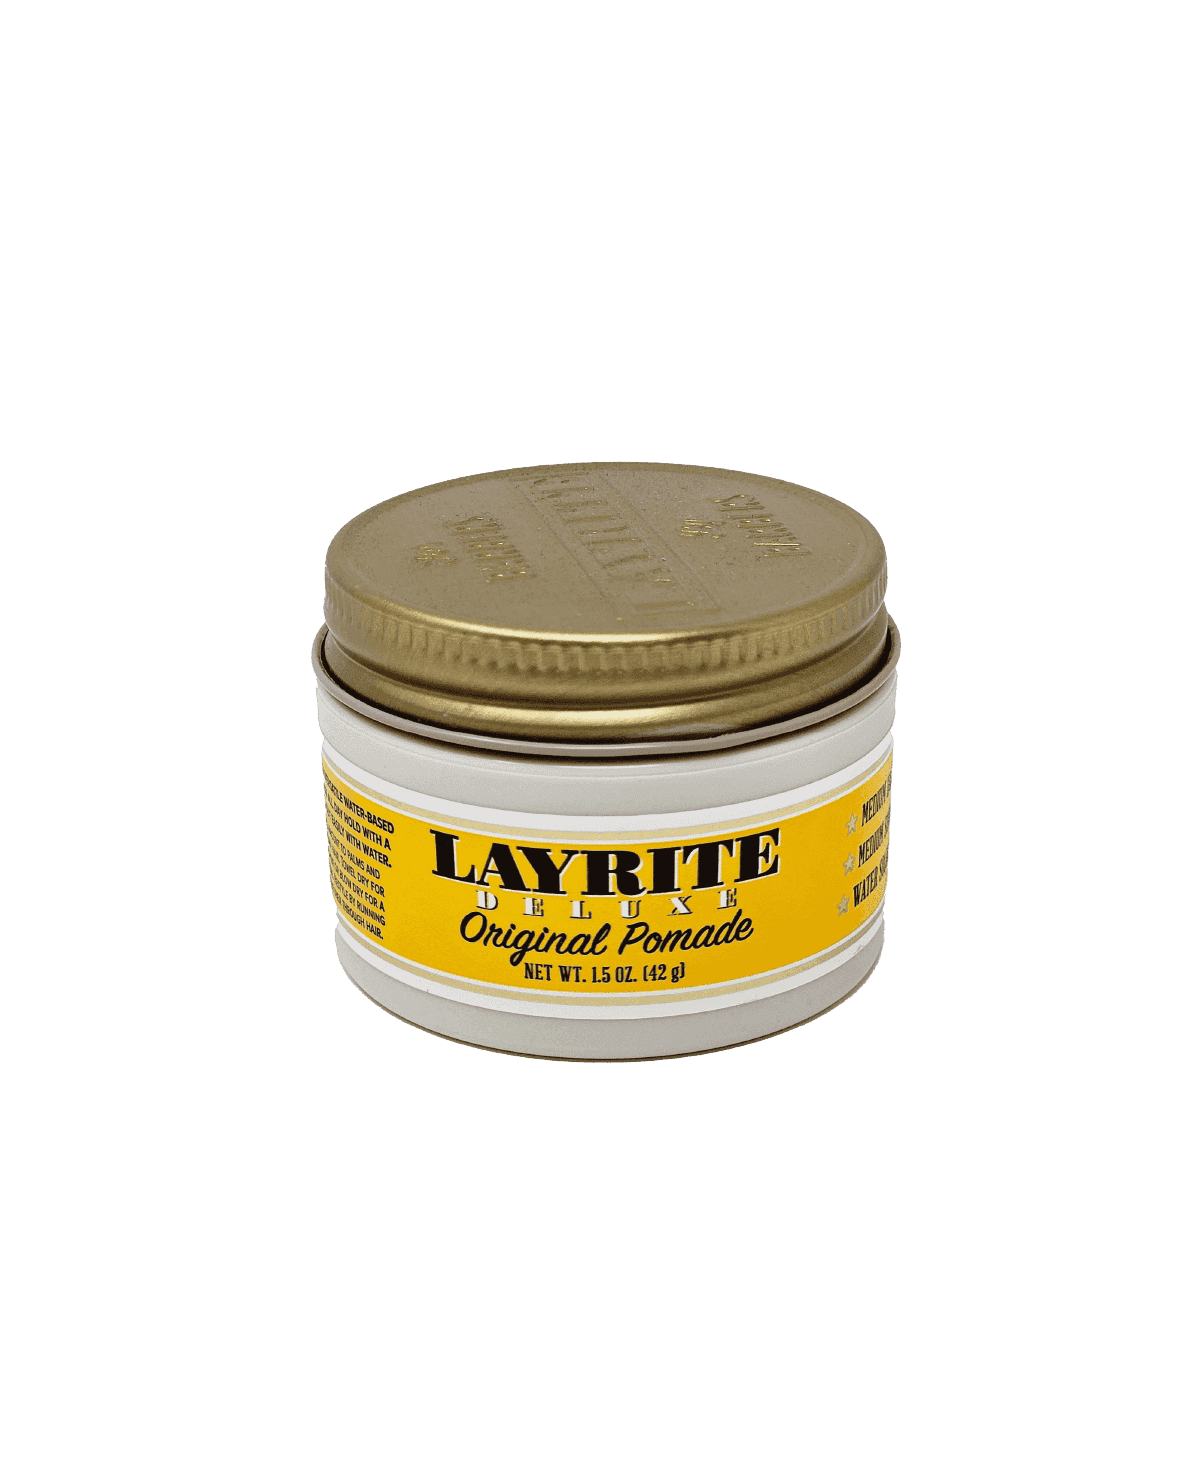 Layrite Deluxe Original Pomade